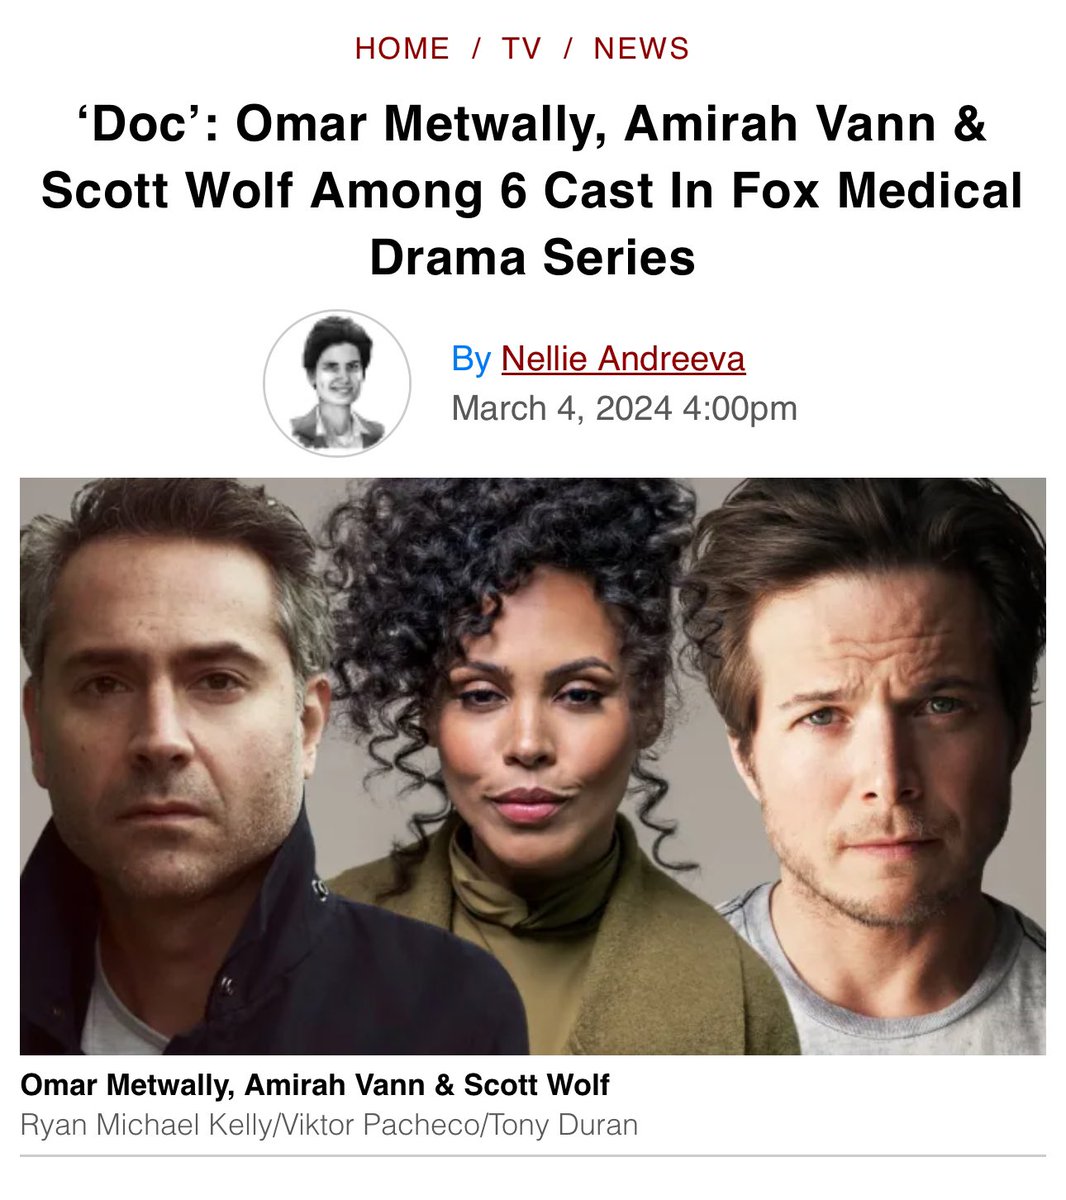 Soooooooo EXCITED to be joining this INCREDIBLE team and this TRULY SPECIAL show. And back on @FOXTV where just a few short years ago it all started for me on that one show….😉 Can’t wait for you all to see this one! Love, a very happy TV Doctor. 🙏🏻❤️ #Doc